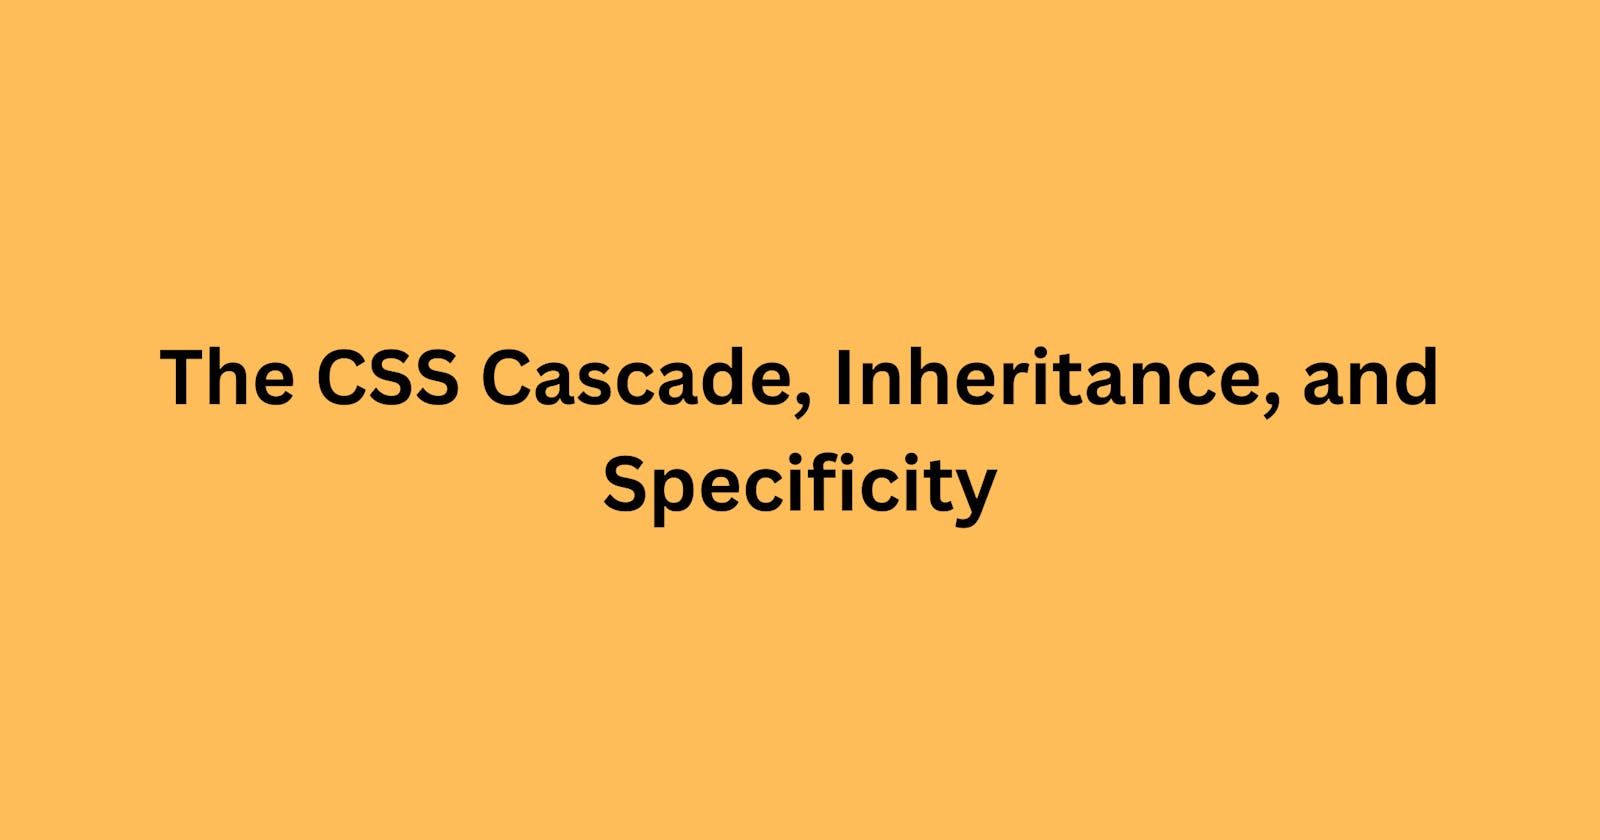 The CSS Cascade, Inheritance, and Specificity